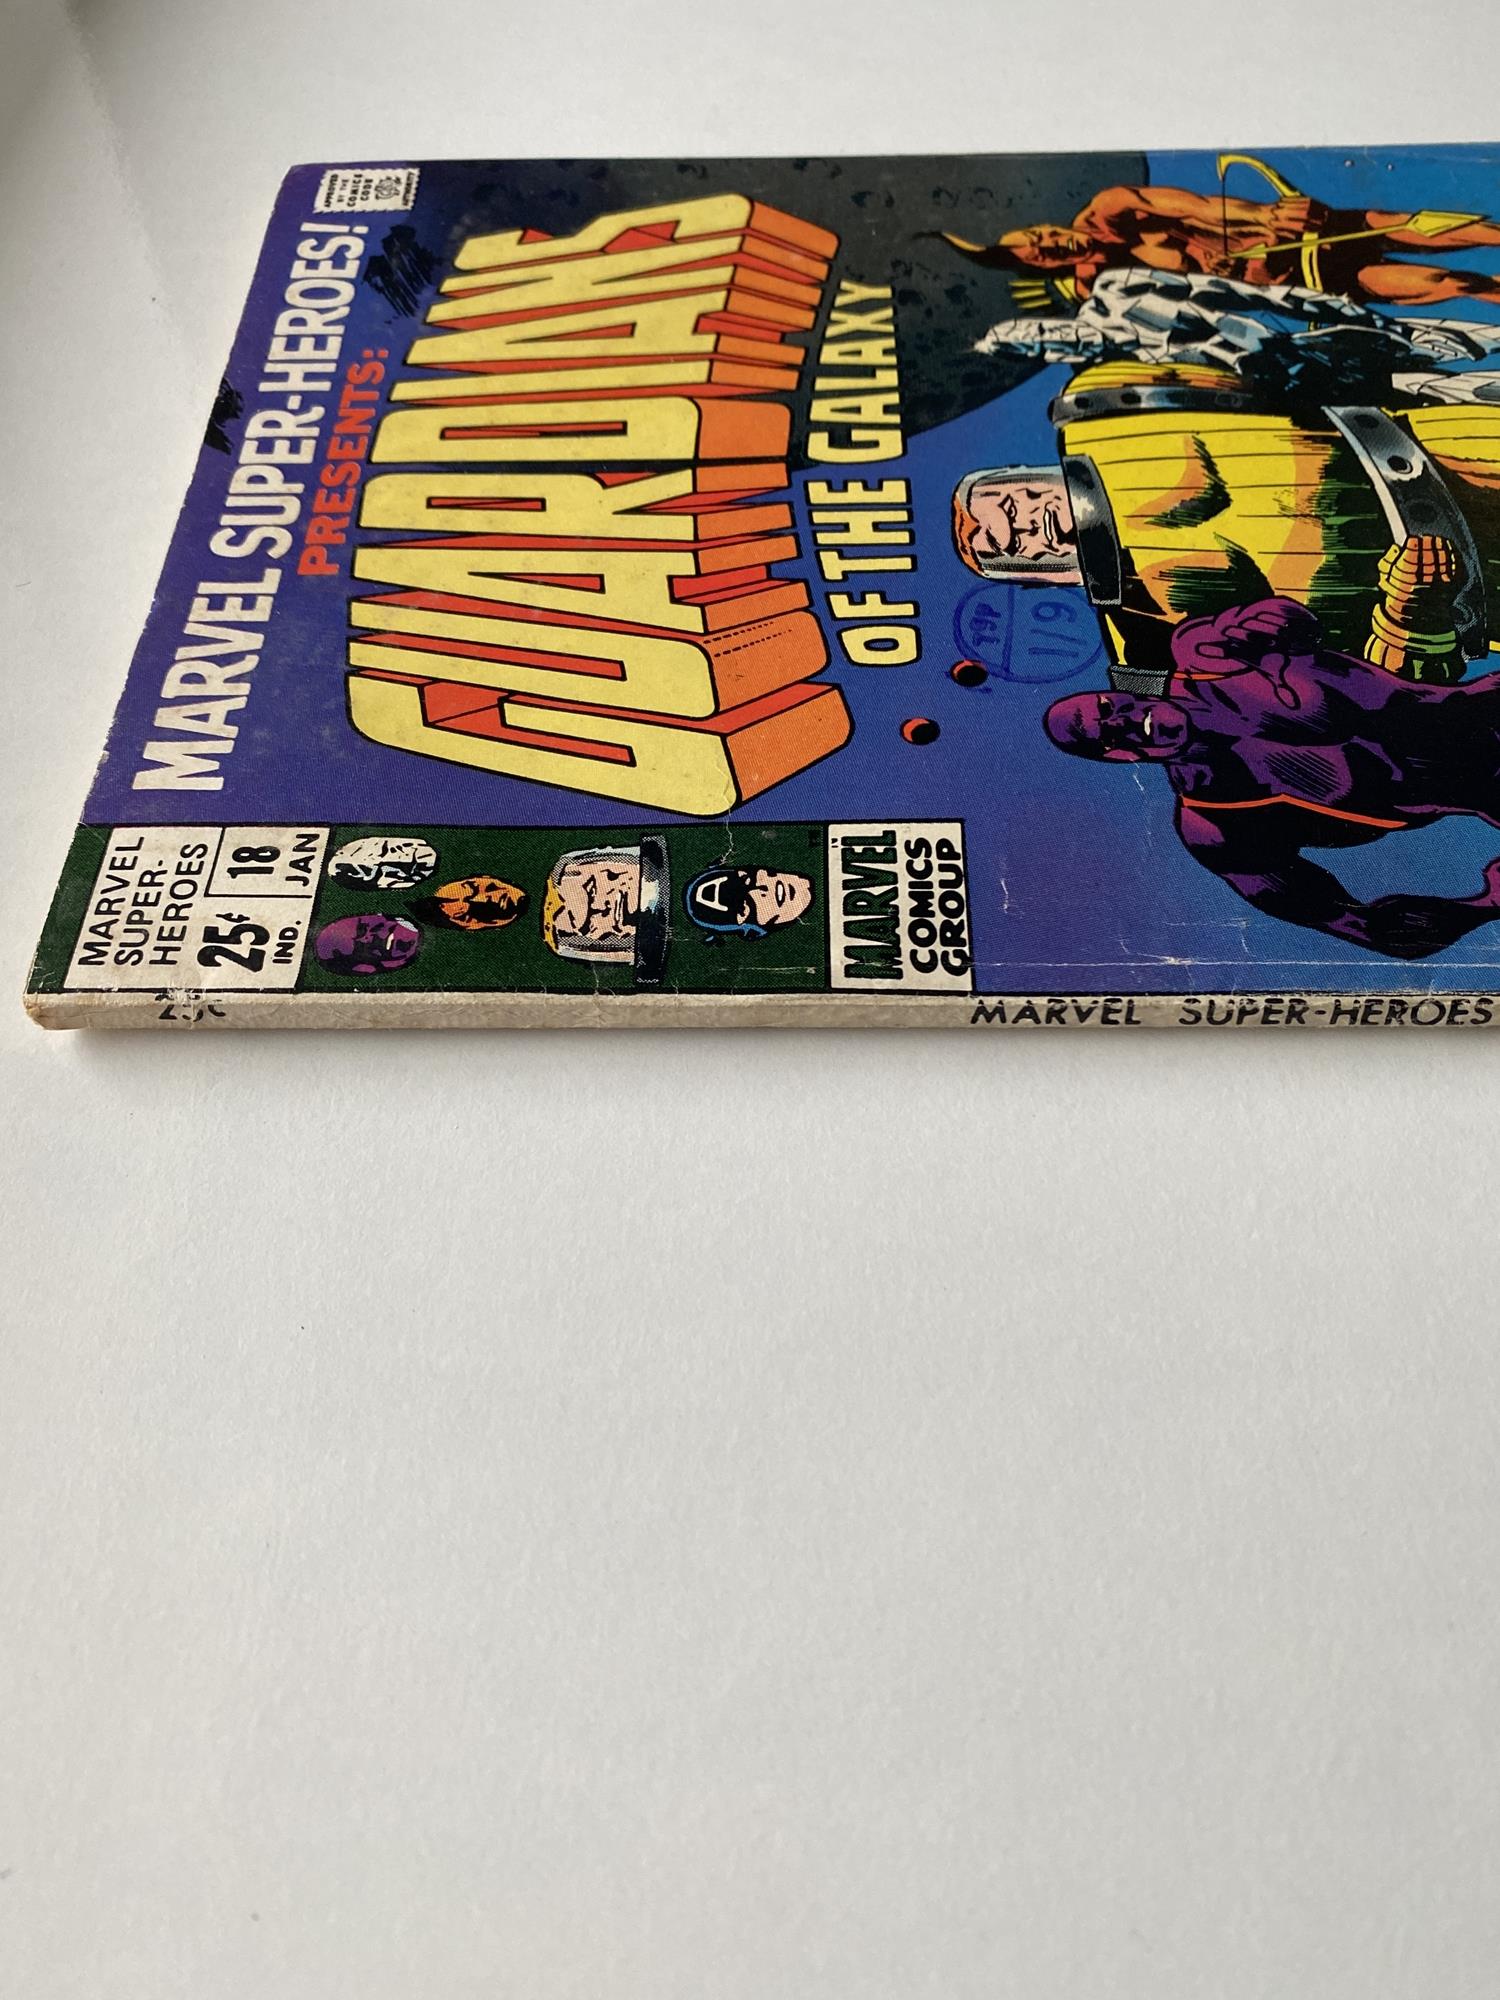 MARVEL SUPER HEROES: GUARDIANS OF THE GALAXY # 18 (1968 - MARVEL - Cents Copy with Pence Stamp) - - Image 6 of 7